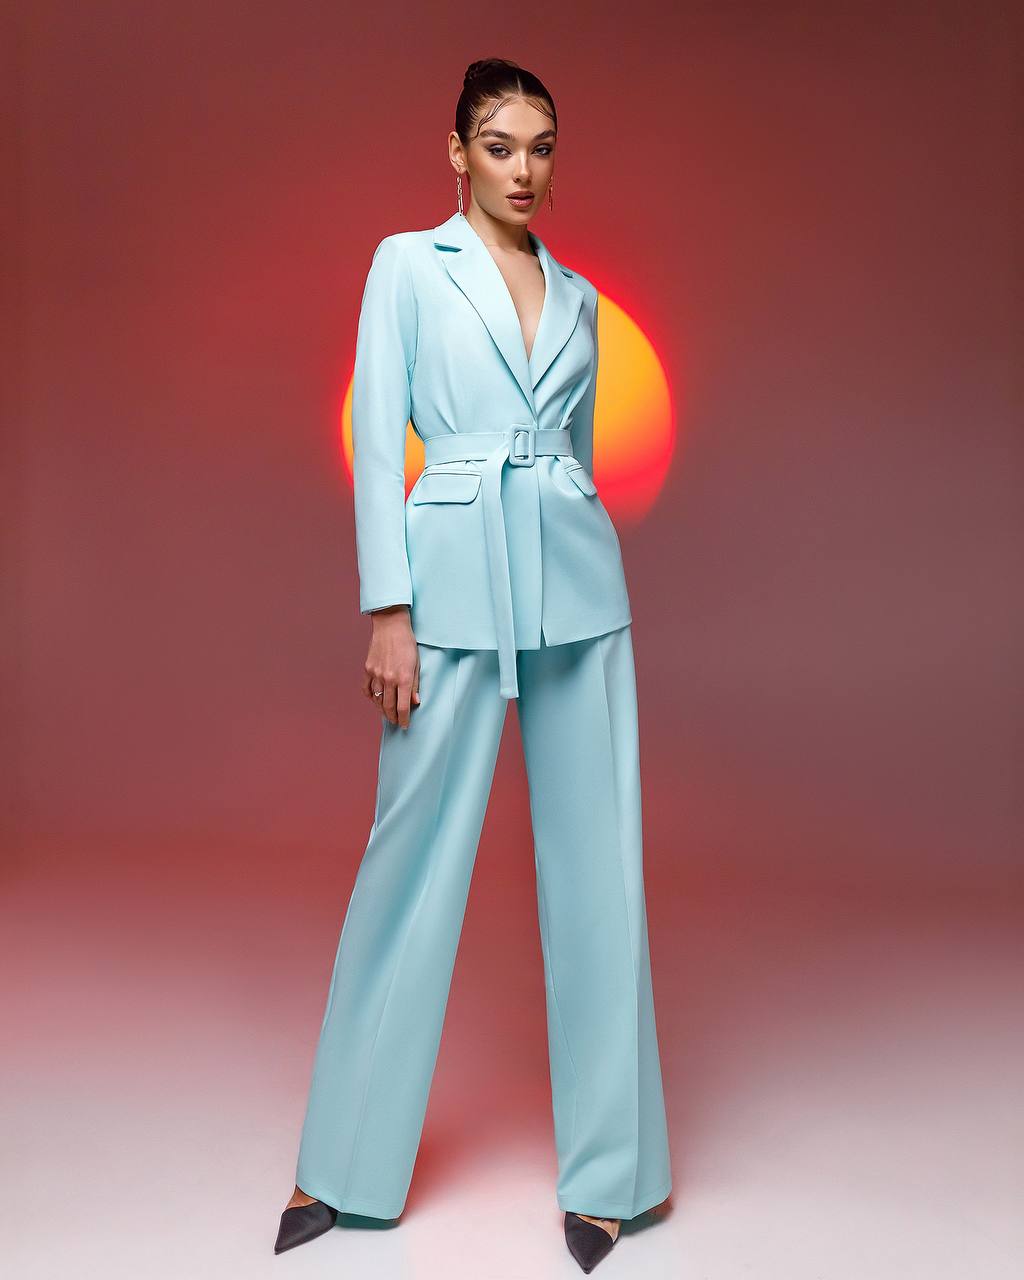 a woman in a light blue suit poses for a picture